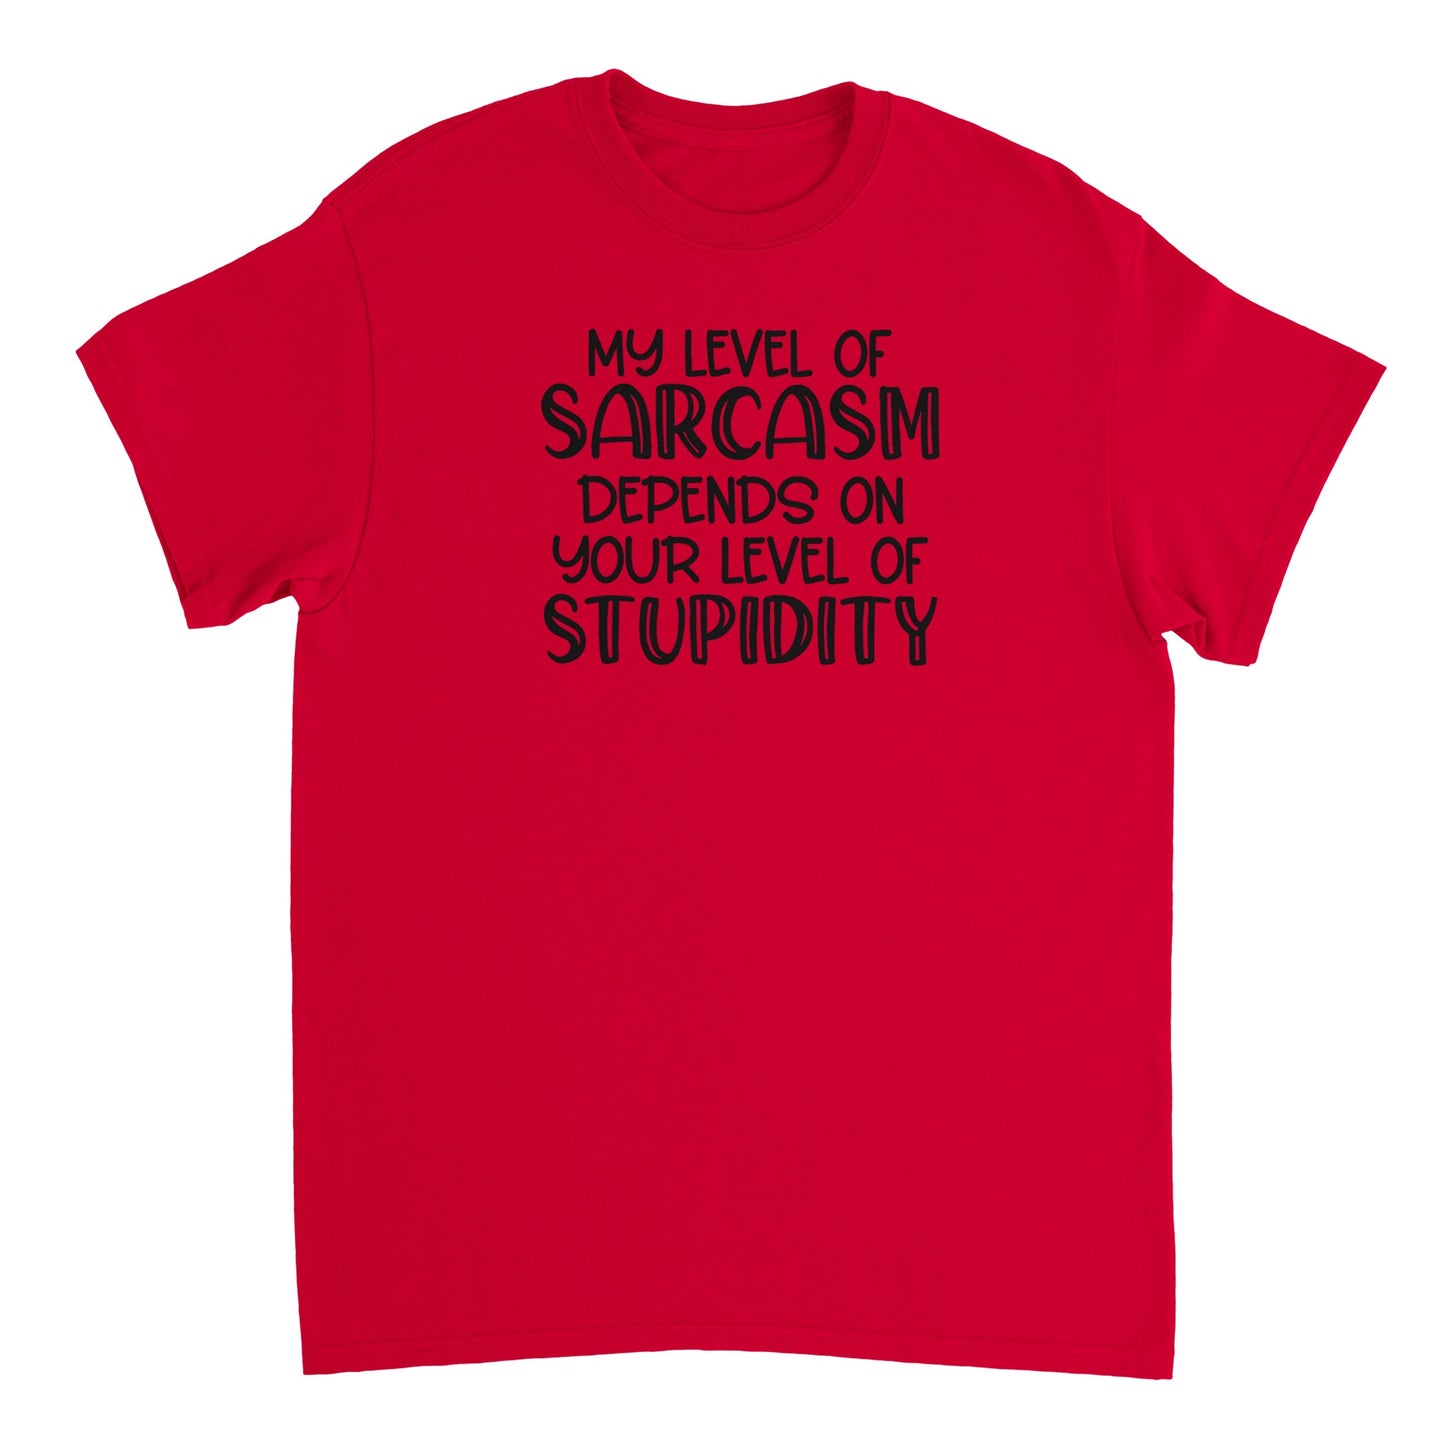 My Level of Sarcasm Depends on Your Level of Stupidity T-shirt - Mister Snarky's